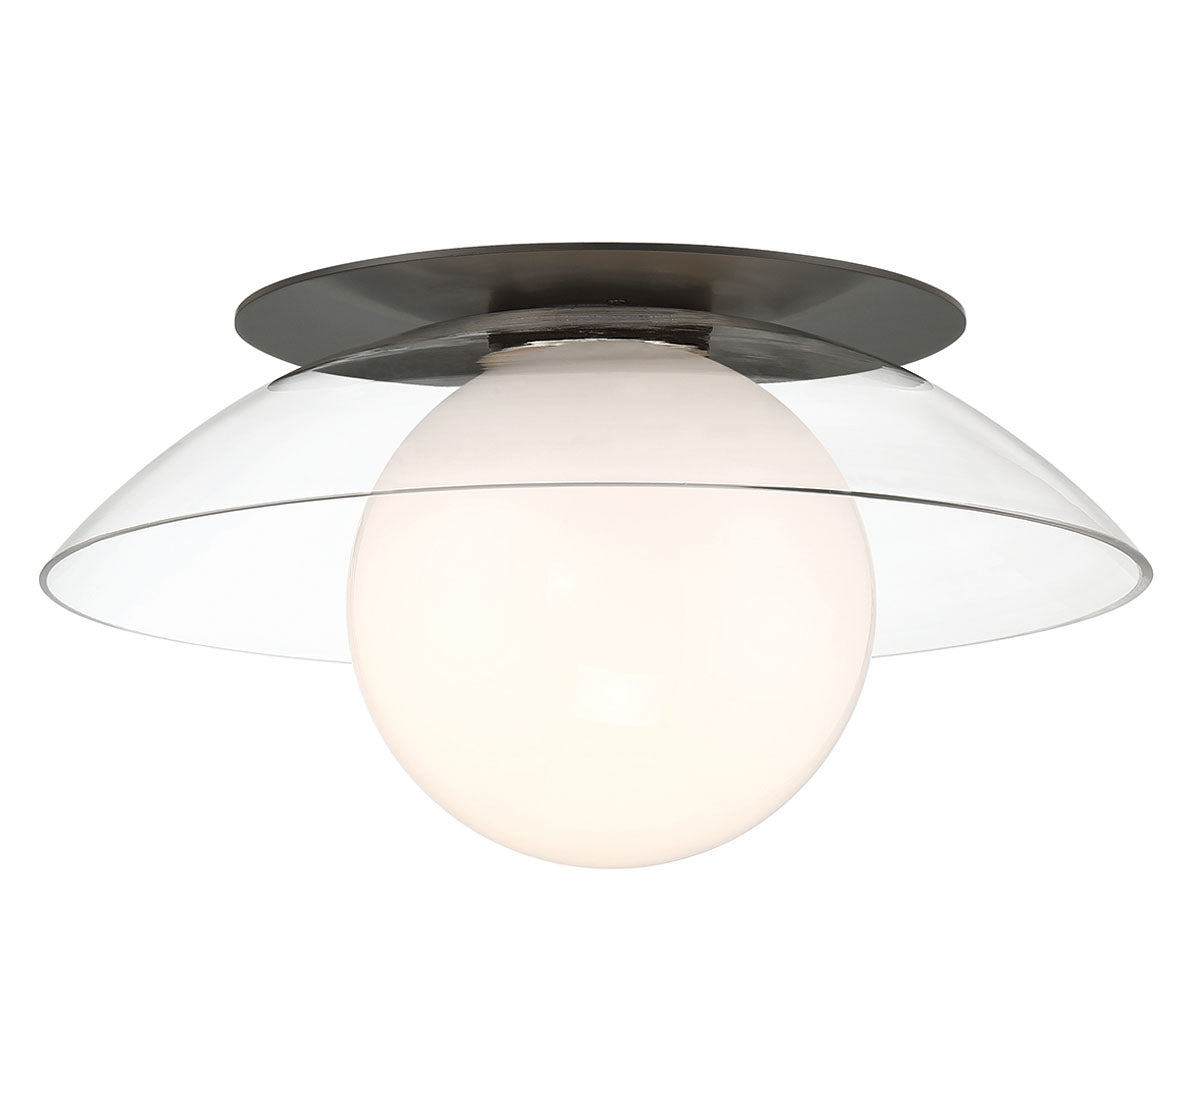 ANCONA 10124-01, Large 1 Light Ceiling / Wall Mount